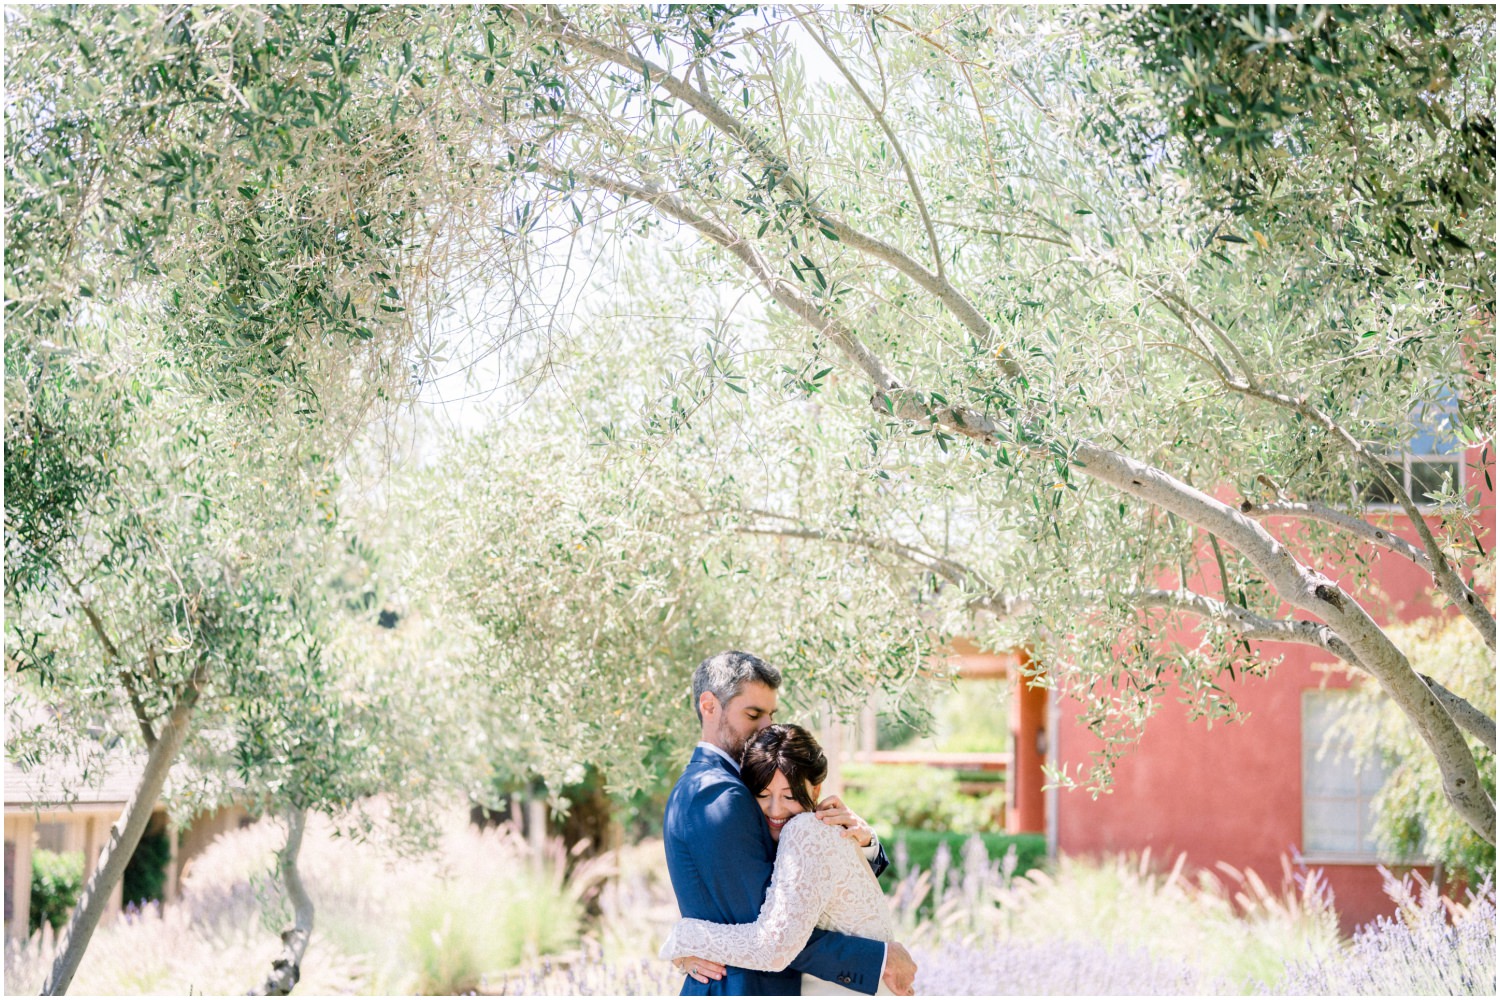 Bride and groom hugging surrounded by trees